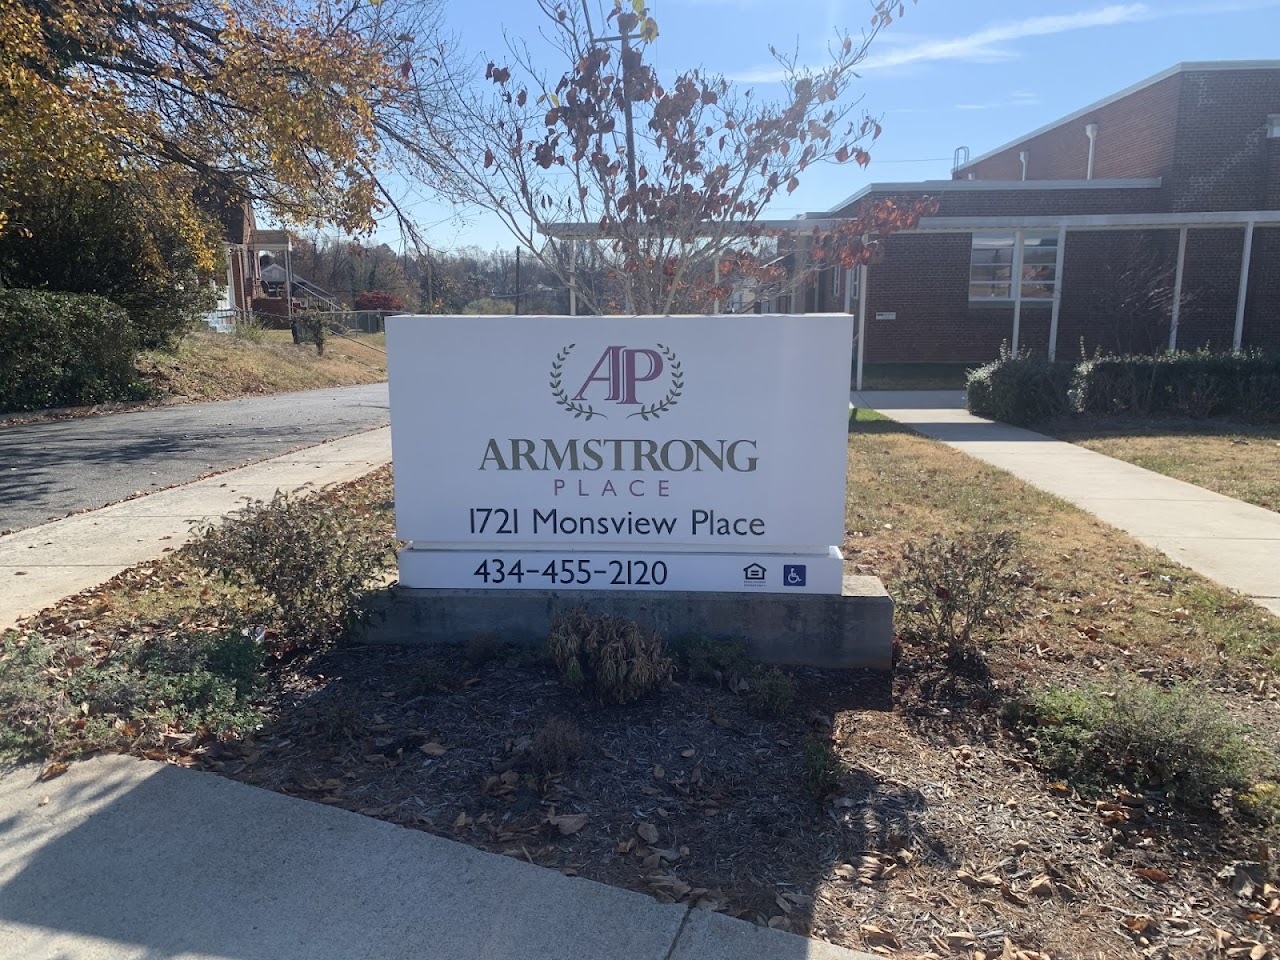 Photo of ARMSTRONG PLACE. Affordable housing located at 1721 MONSVIEW PLACE LYNCHBURG, VA 24504